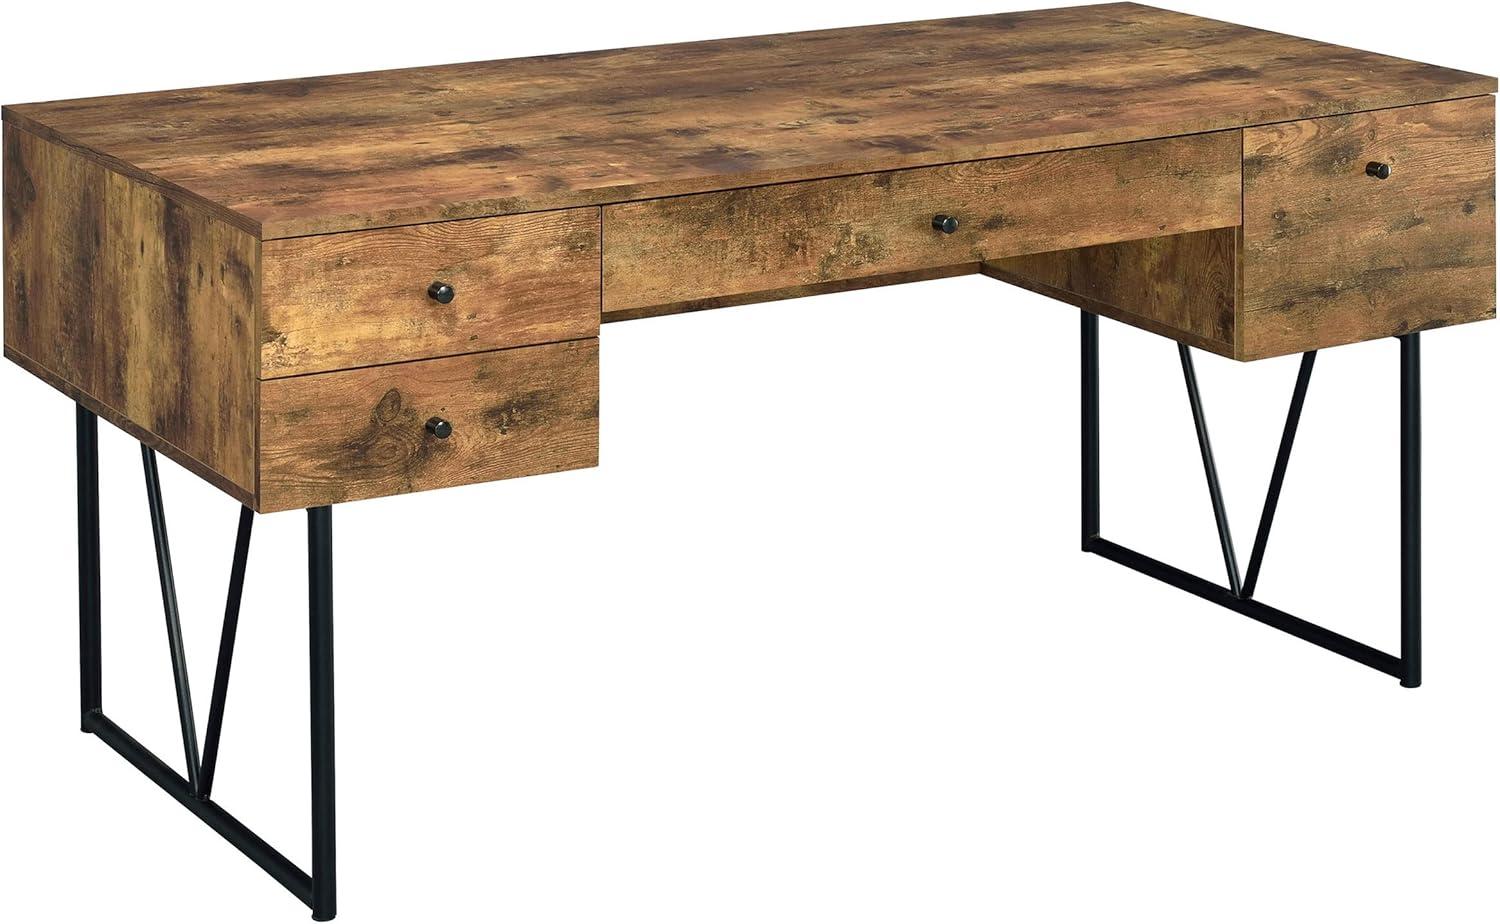 Rustic Industrial Nutmeg Brown Home Office Desk with 4 Drawers